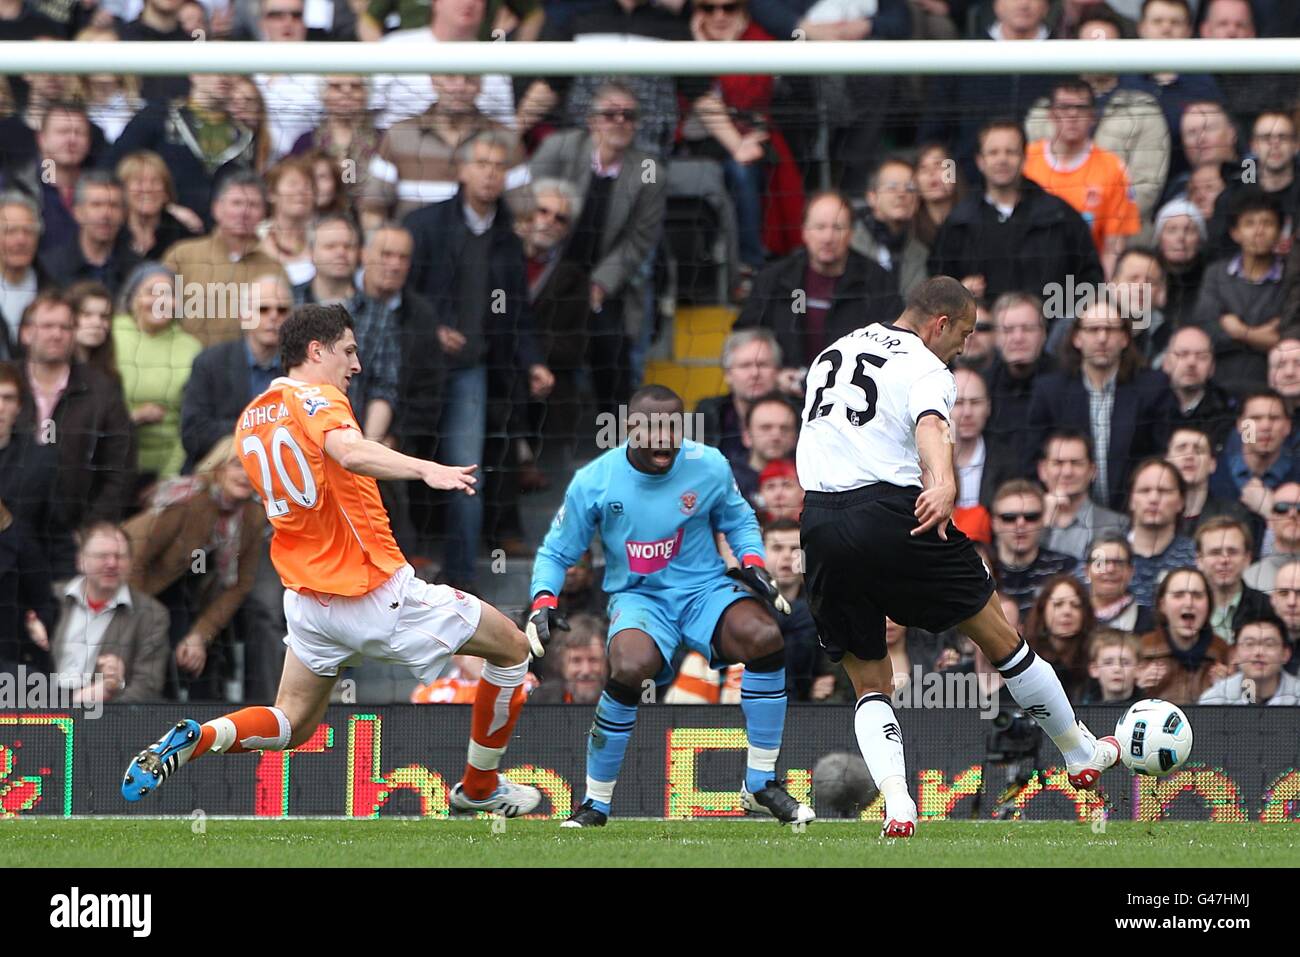 Soccer - Barclays Premier League - Fulham v Blackpool - Craven Cottage. Fulham's Bobby Zamora (right) scores their first goal Stock Photo